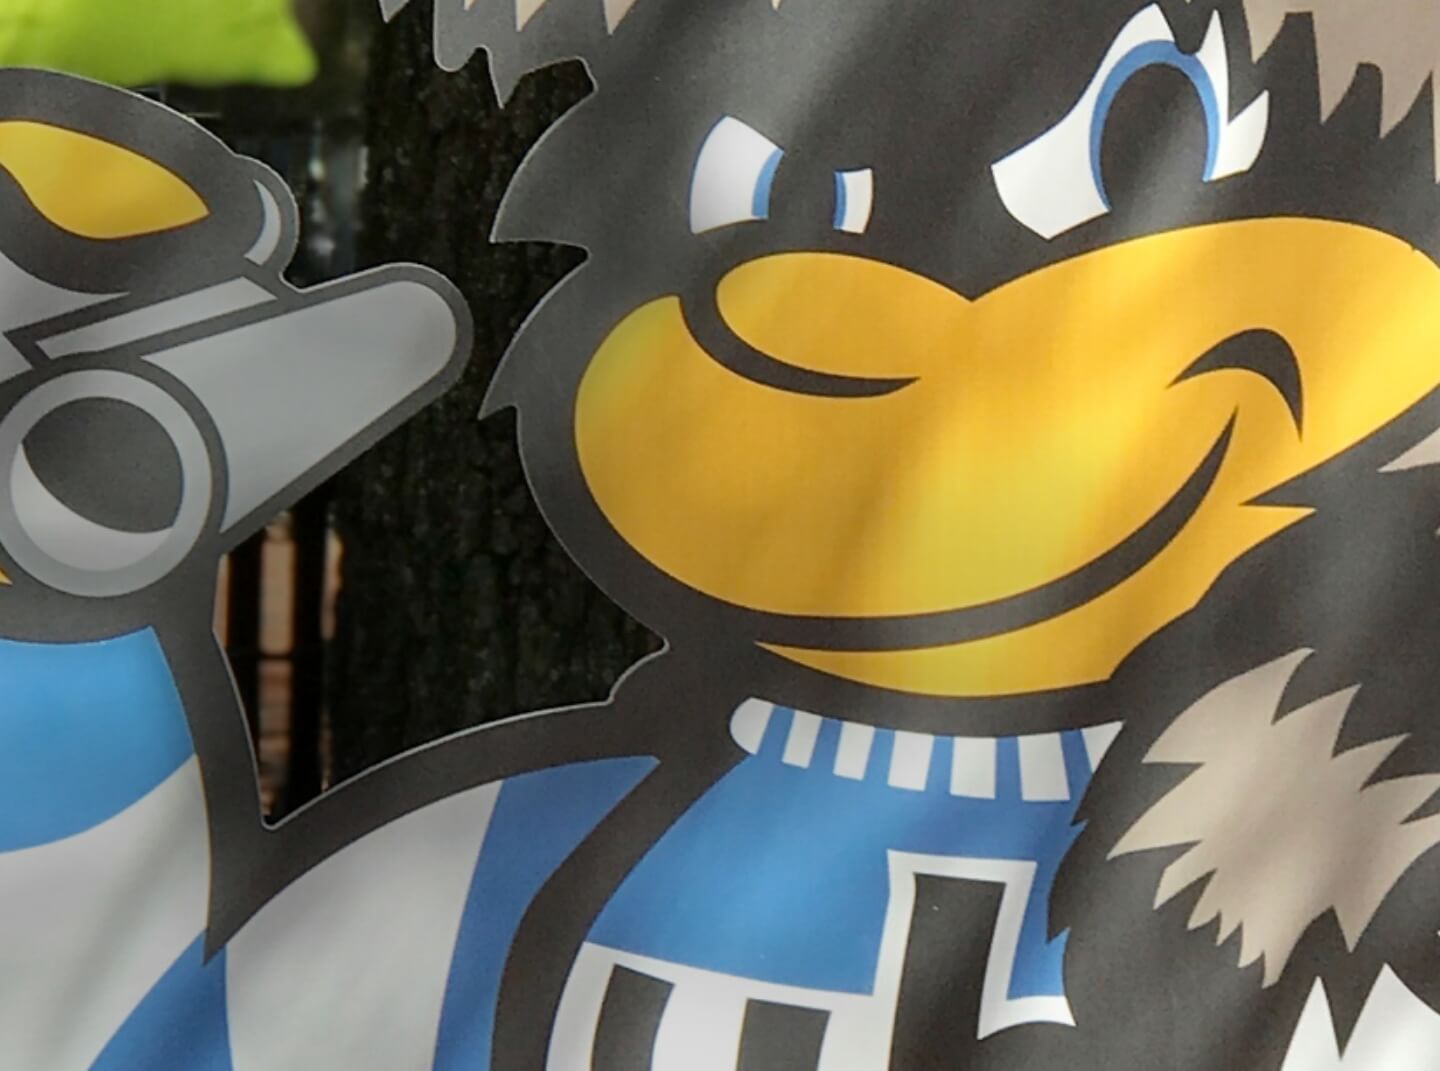 Cutout illustration of the University of Baltimore bee mascot holding binoculars, part of the event decorations for Gamescape designed by idfive